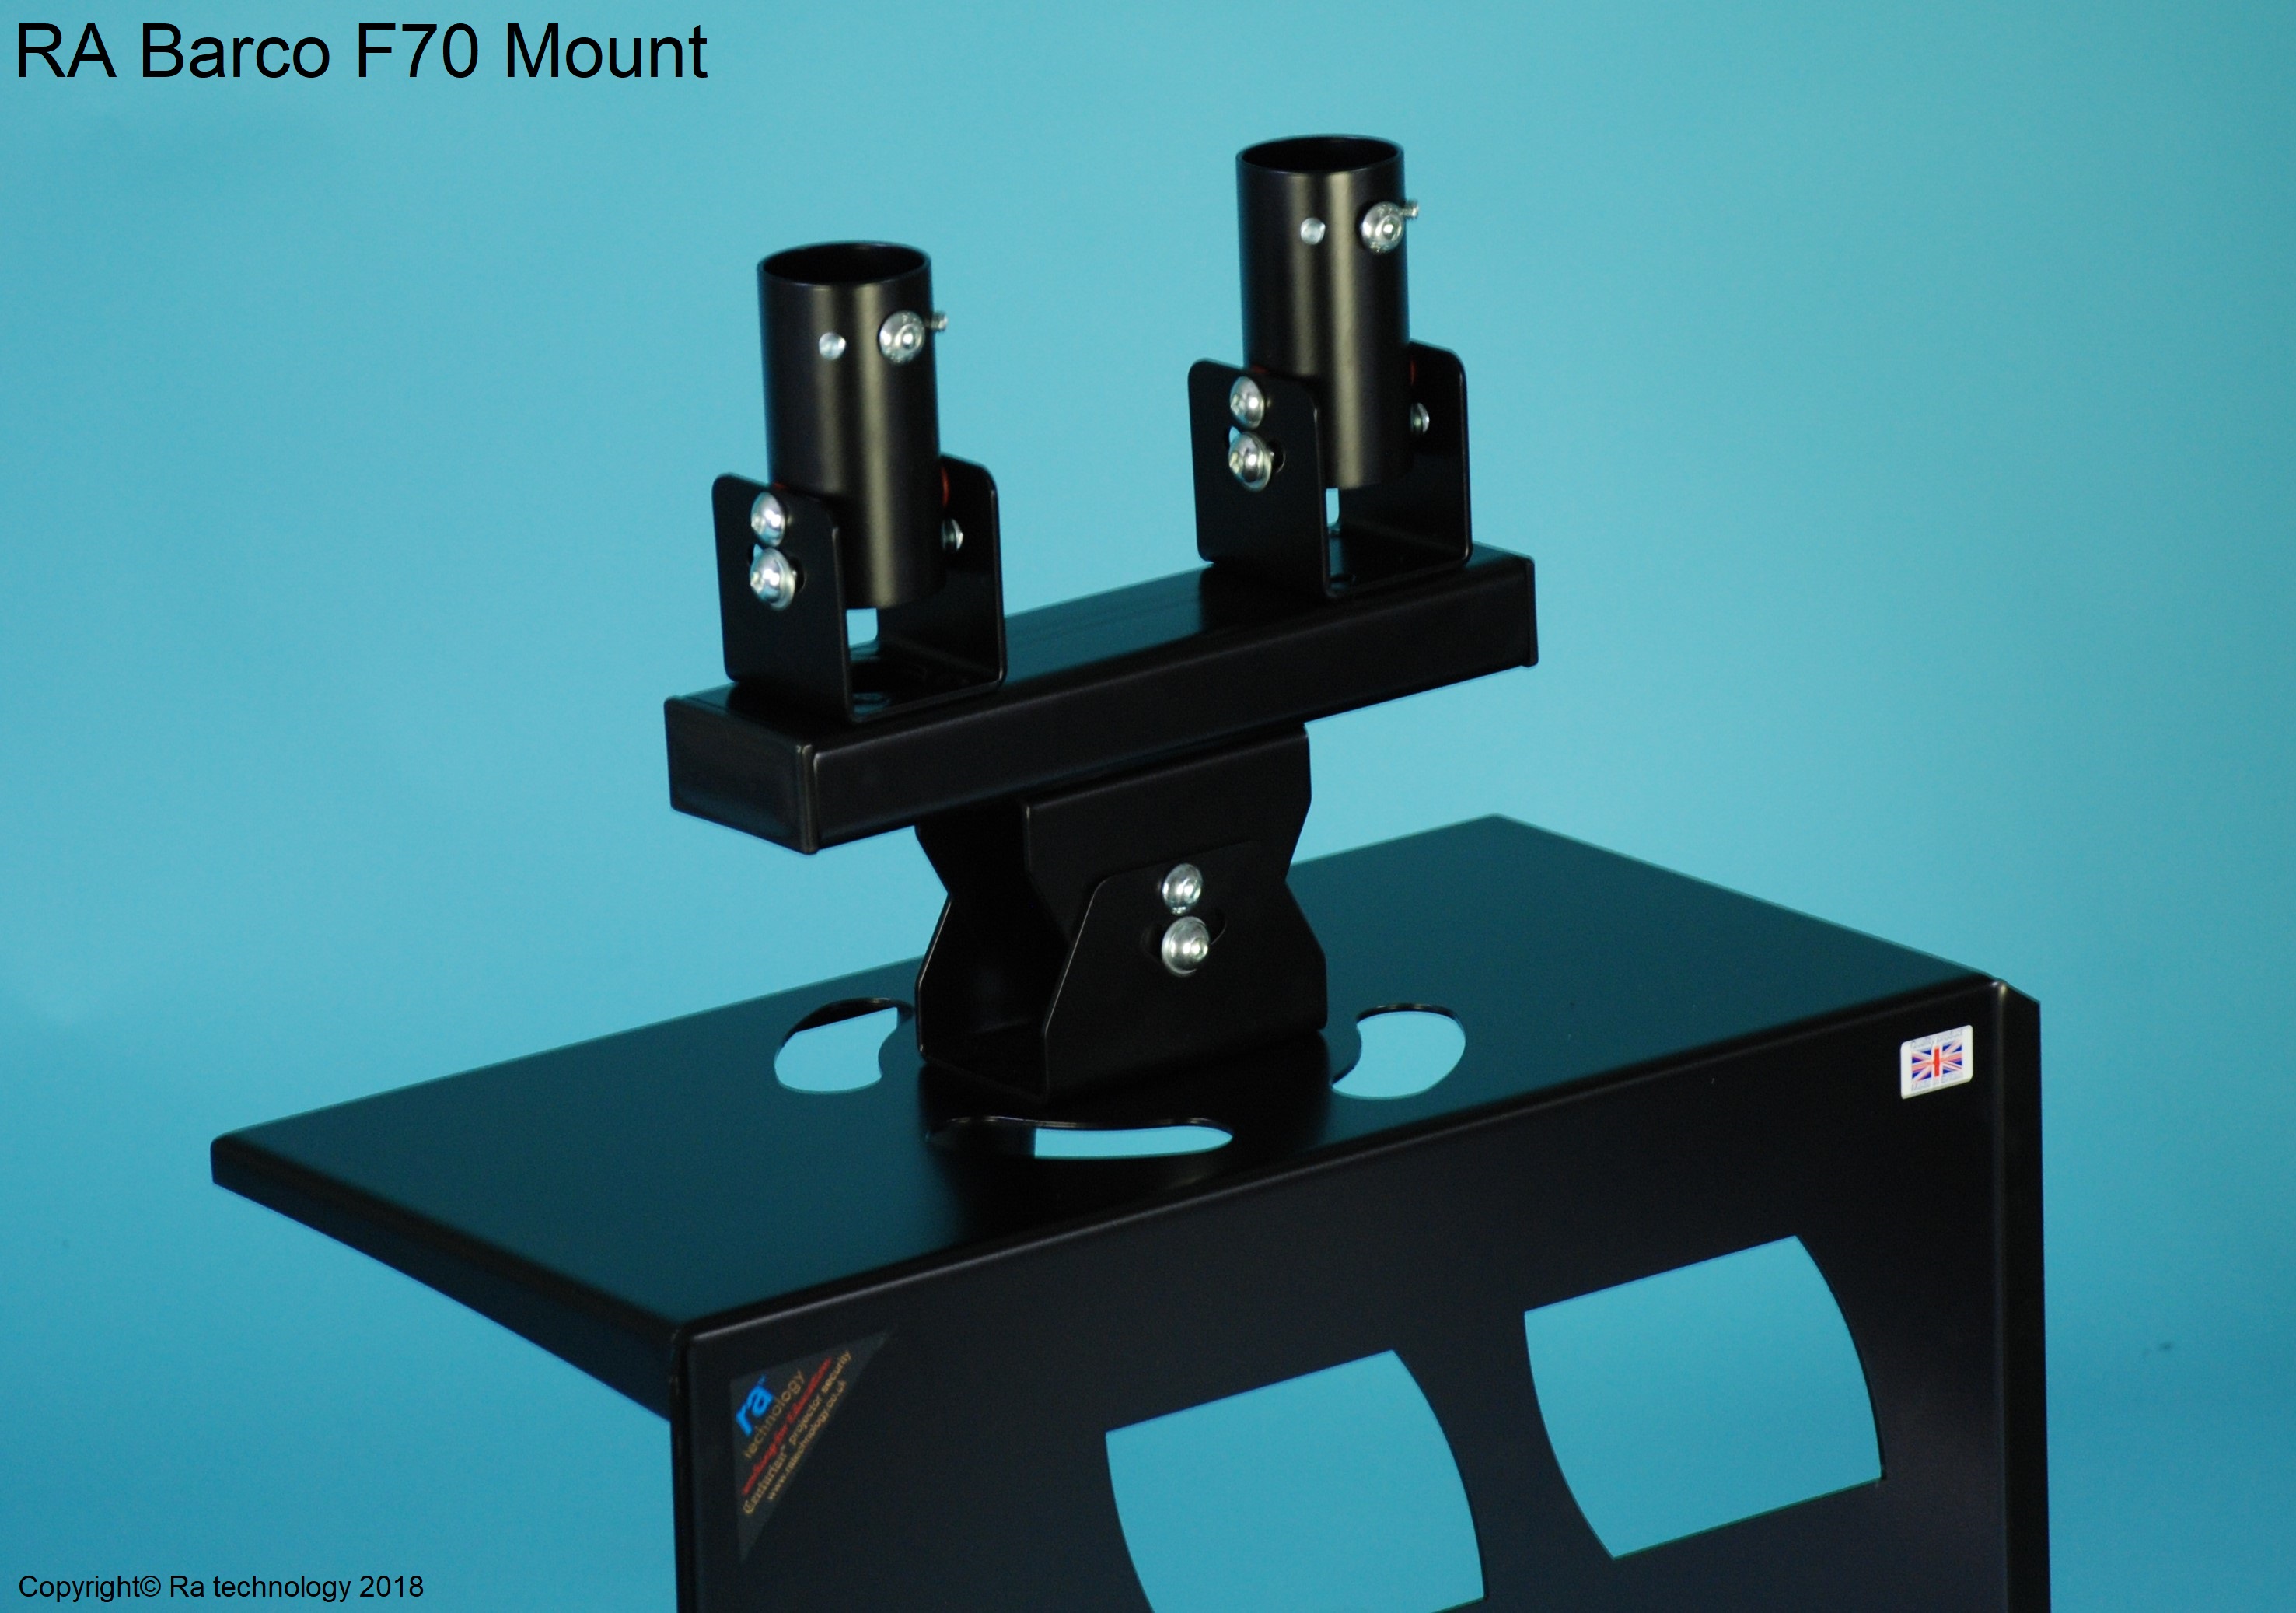 Bespoke Design and Special Build Projector Mounting Solutions.